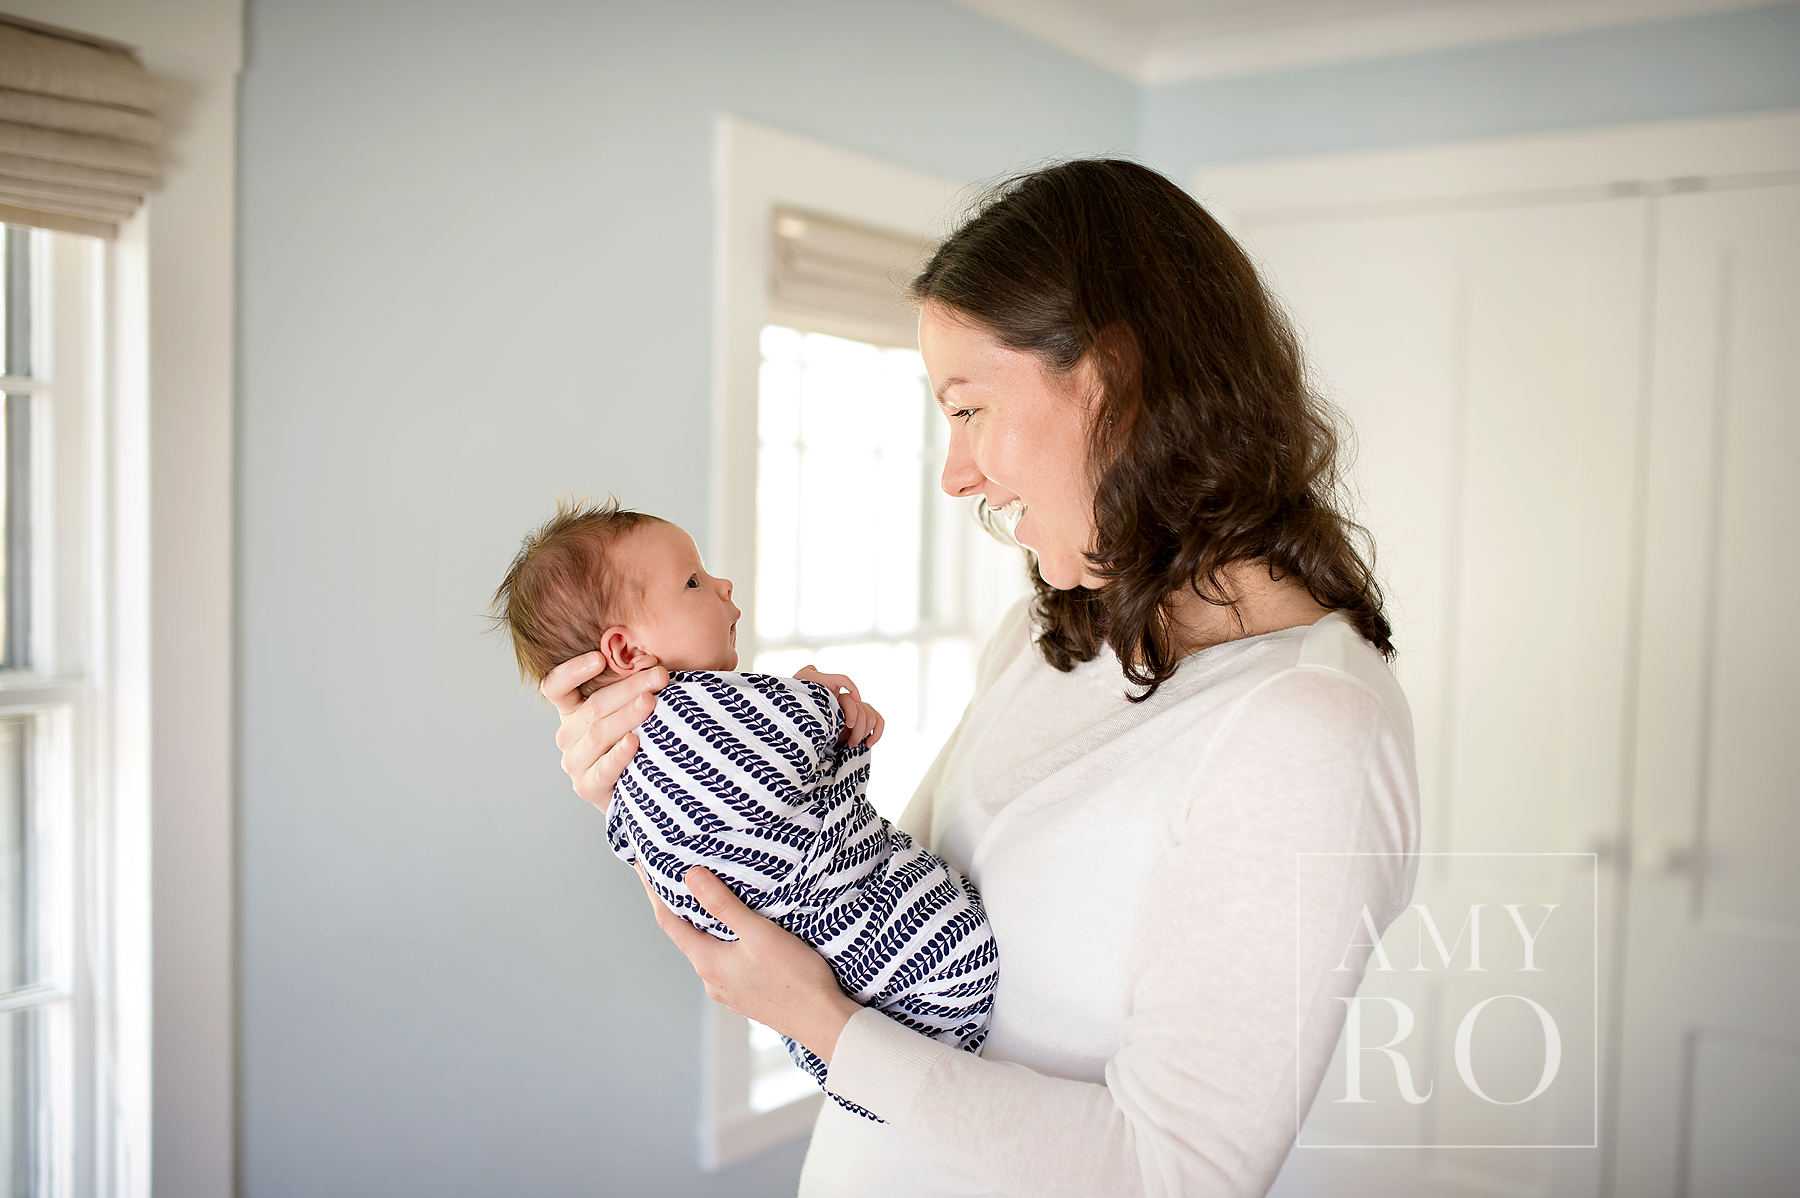 Mom looking at baby smiling during a newborn session in their bedroom in Massachusetts